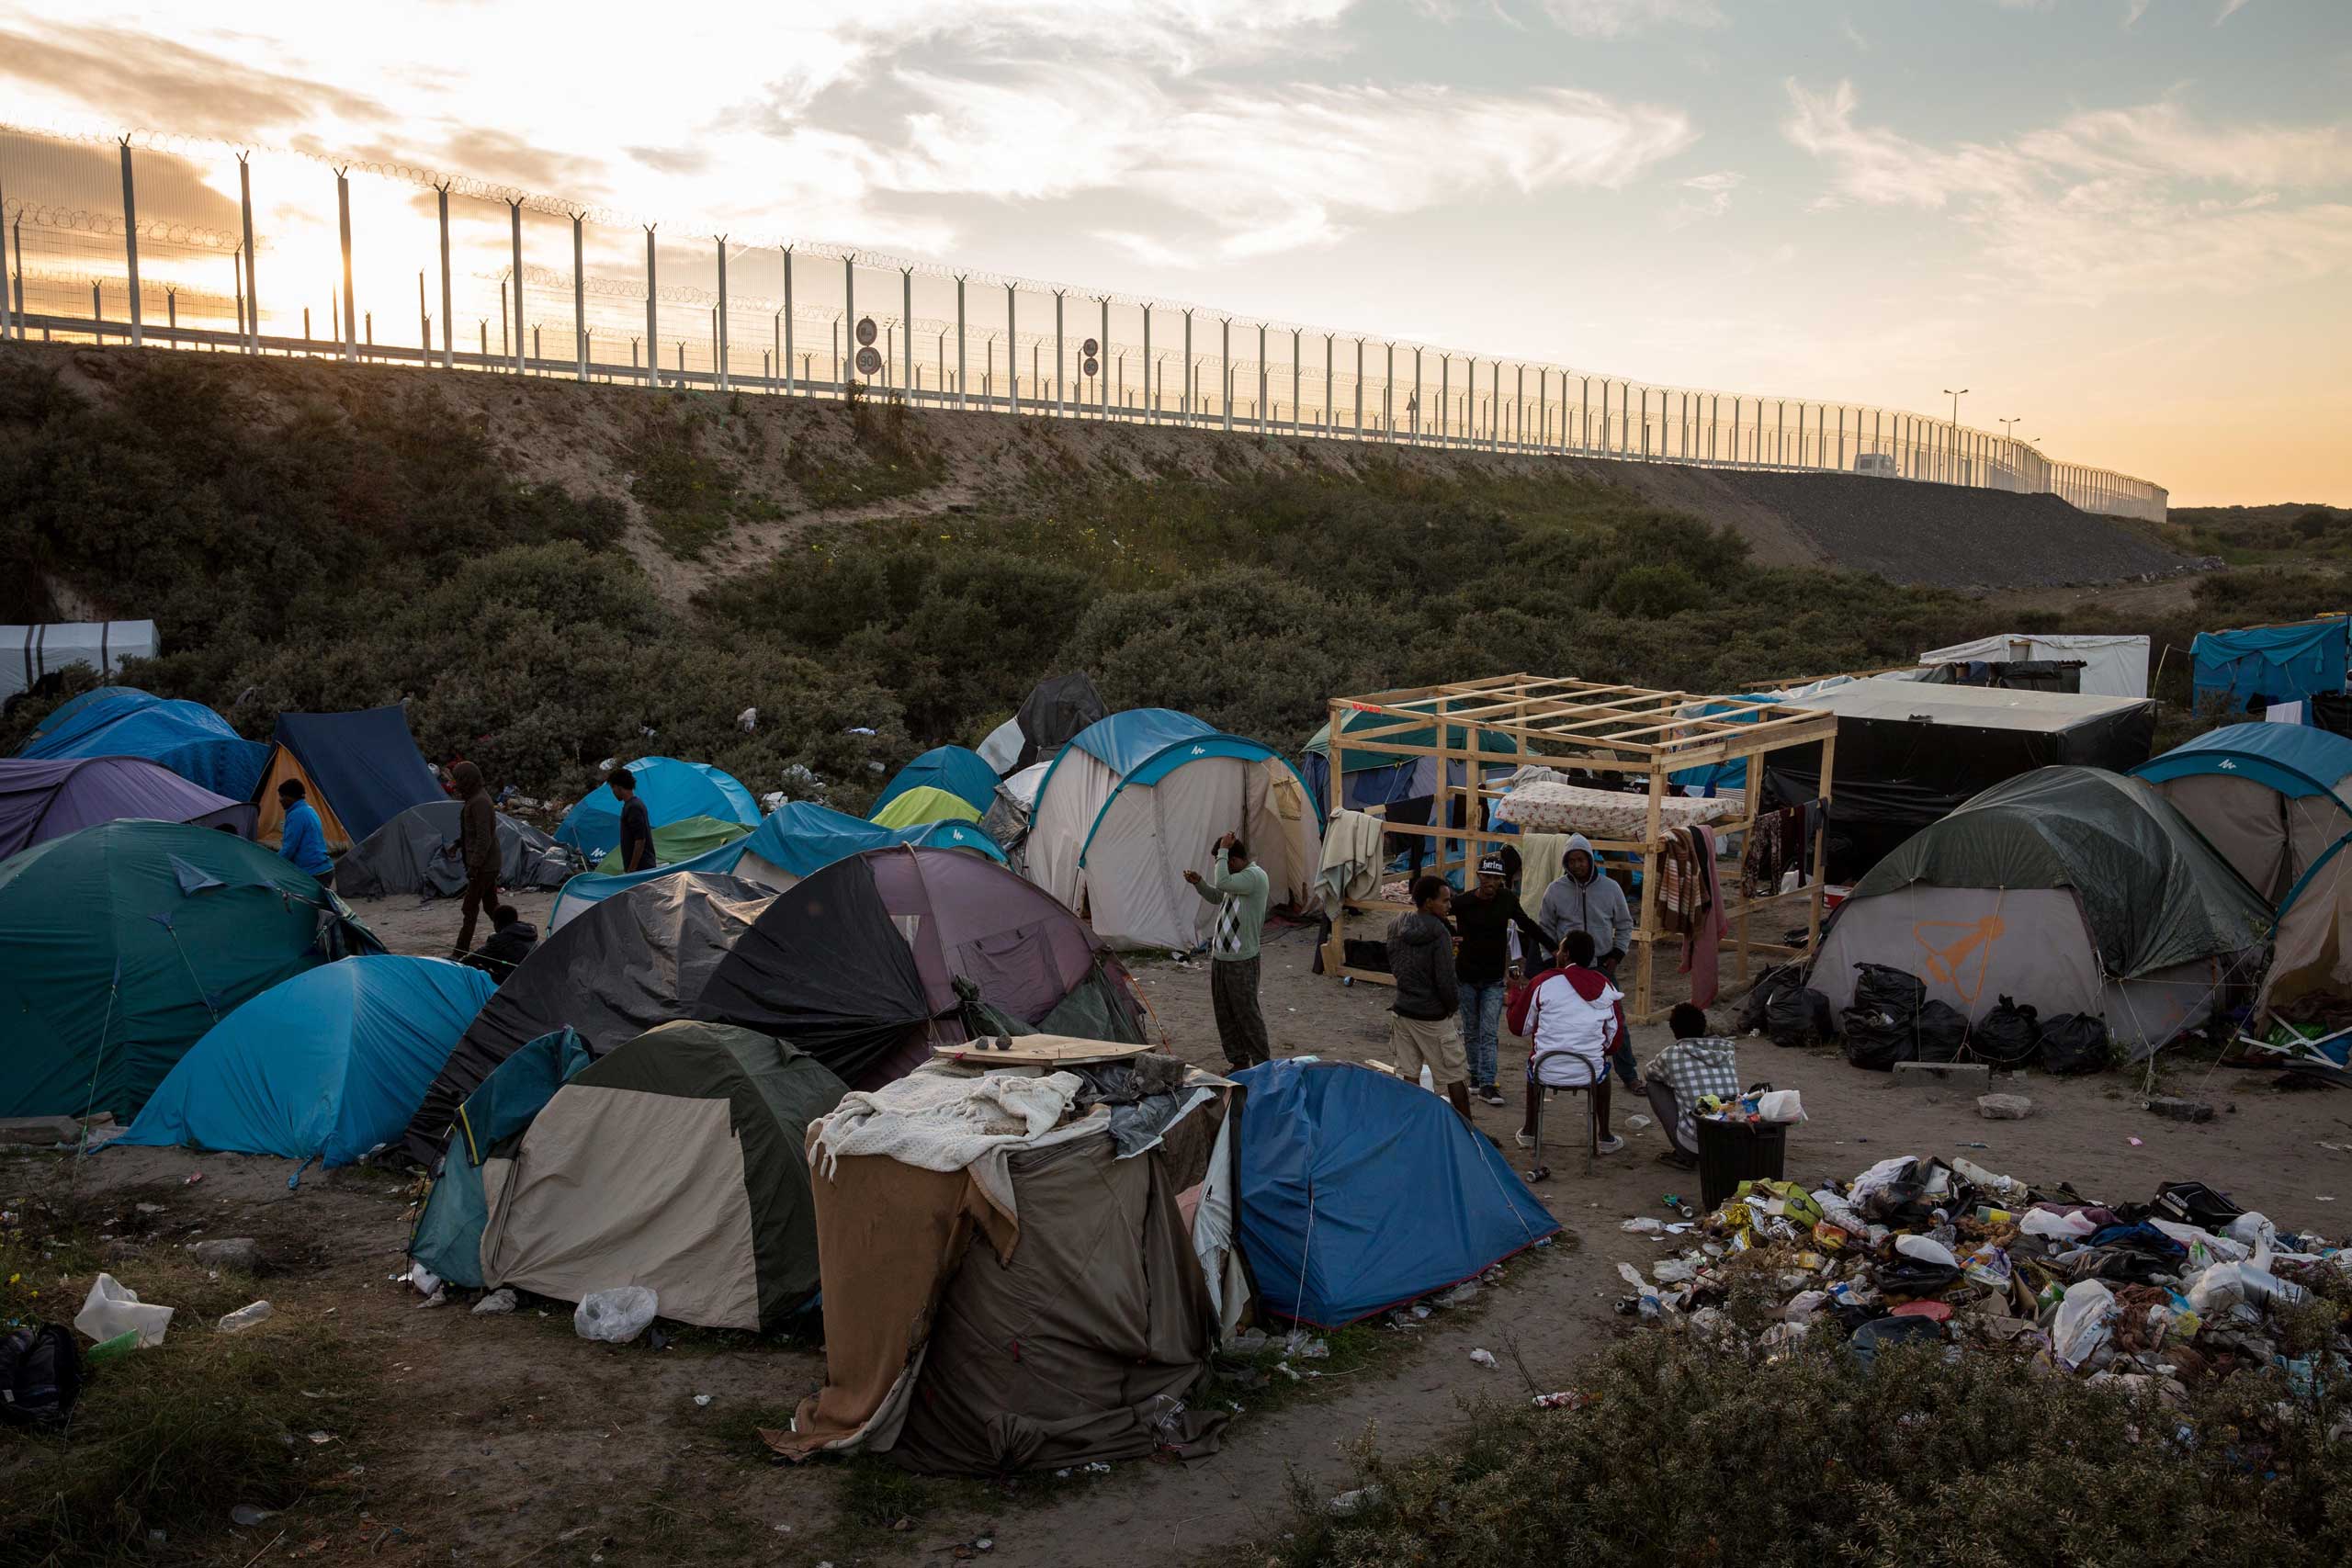 The sun sets behind a make shift camp near the port of Calais, on Aug. 2, 2015. (Rob Stothard—Getty Images)